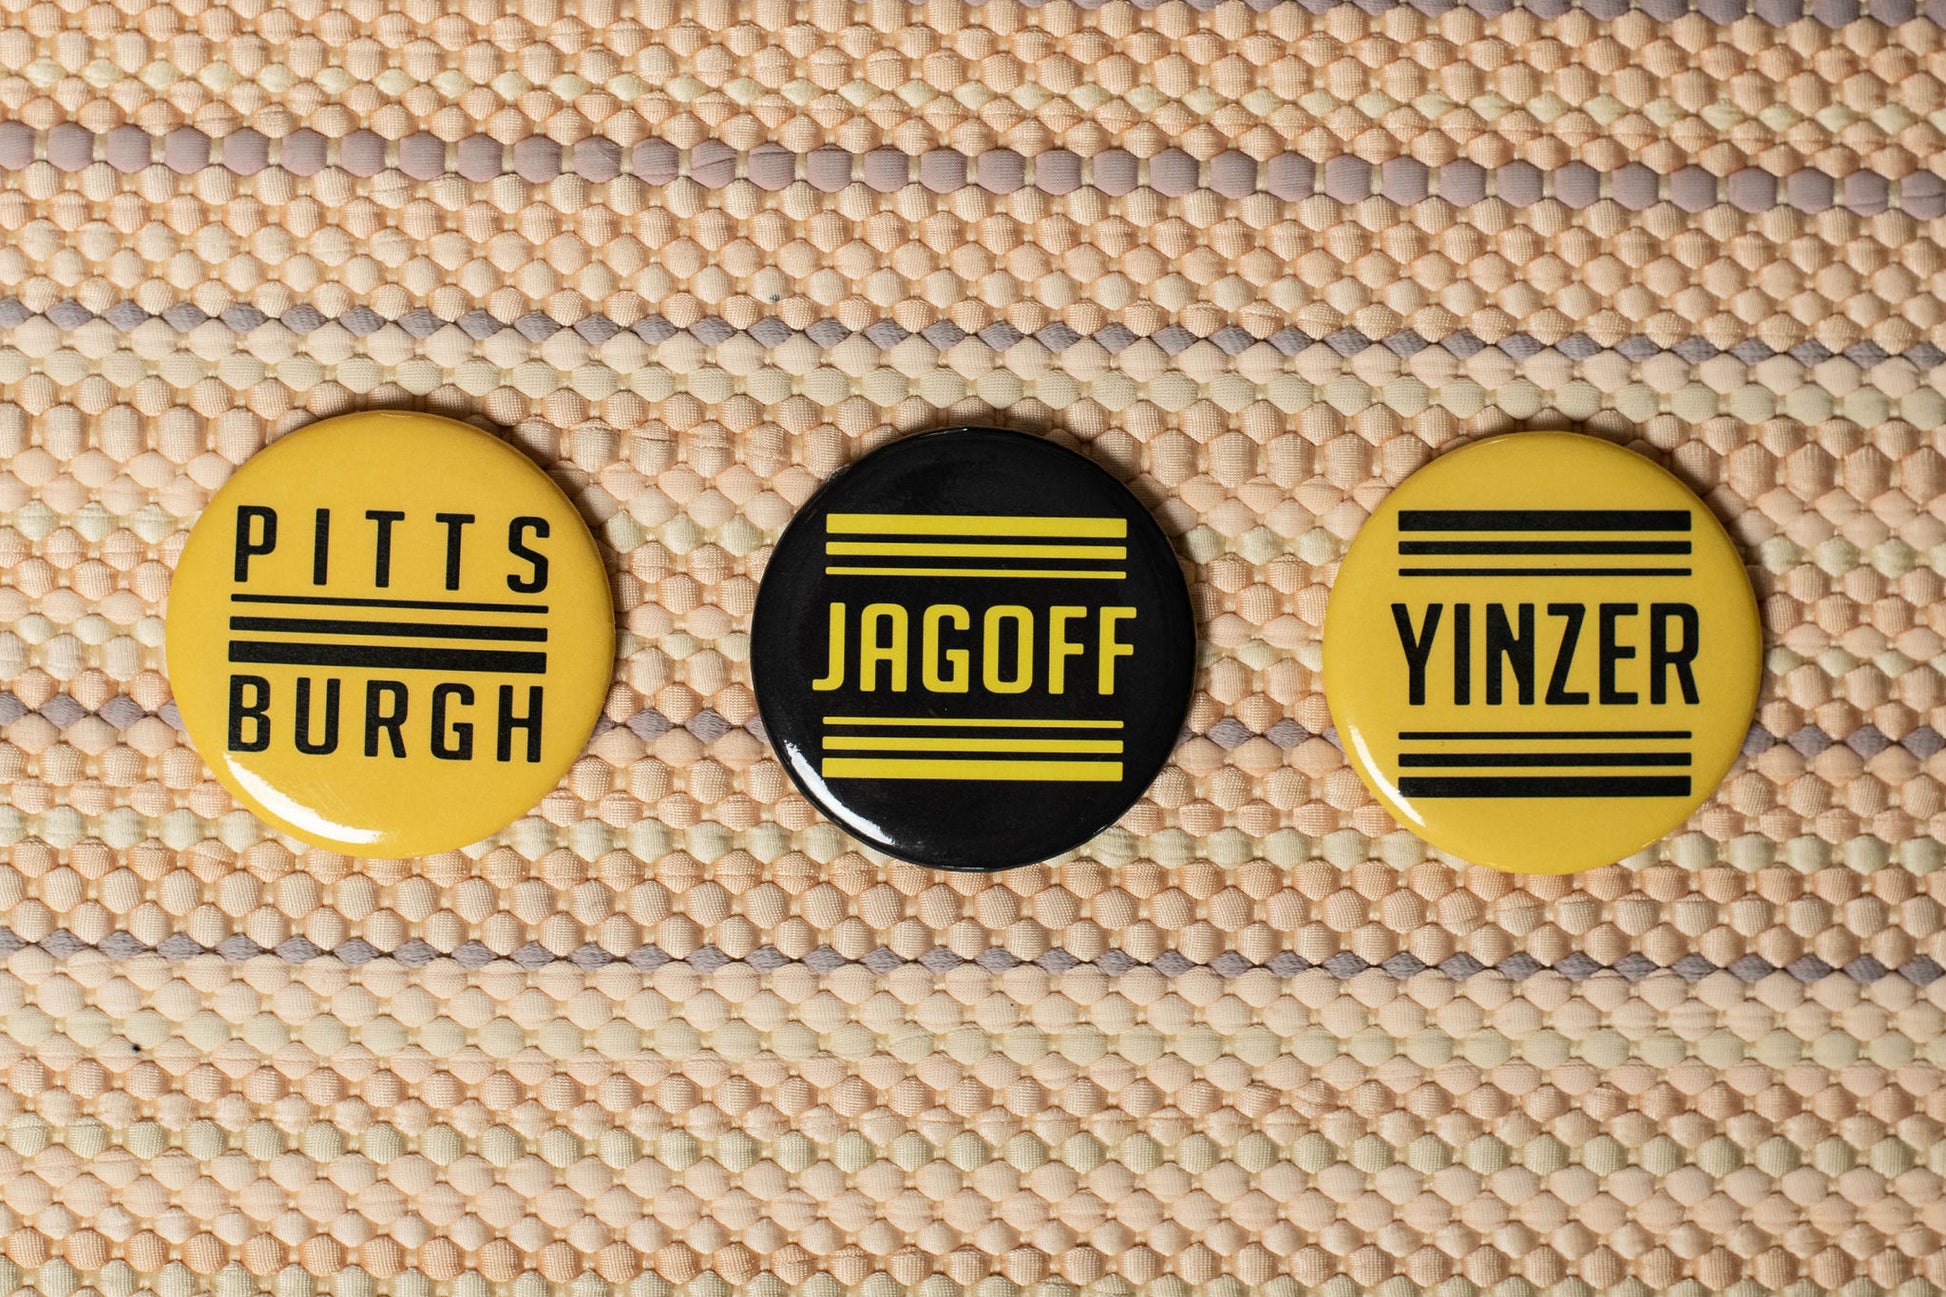 Pittsburgh Fun Pins and Magnets 1 Inch Handmade Buttons Yinzer